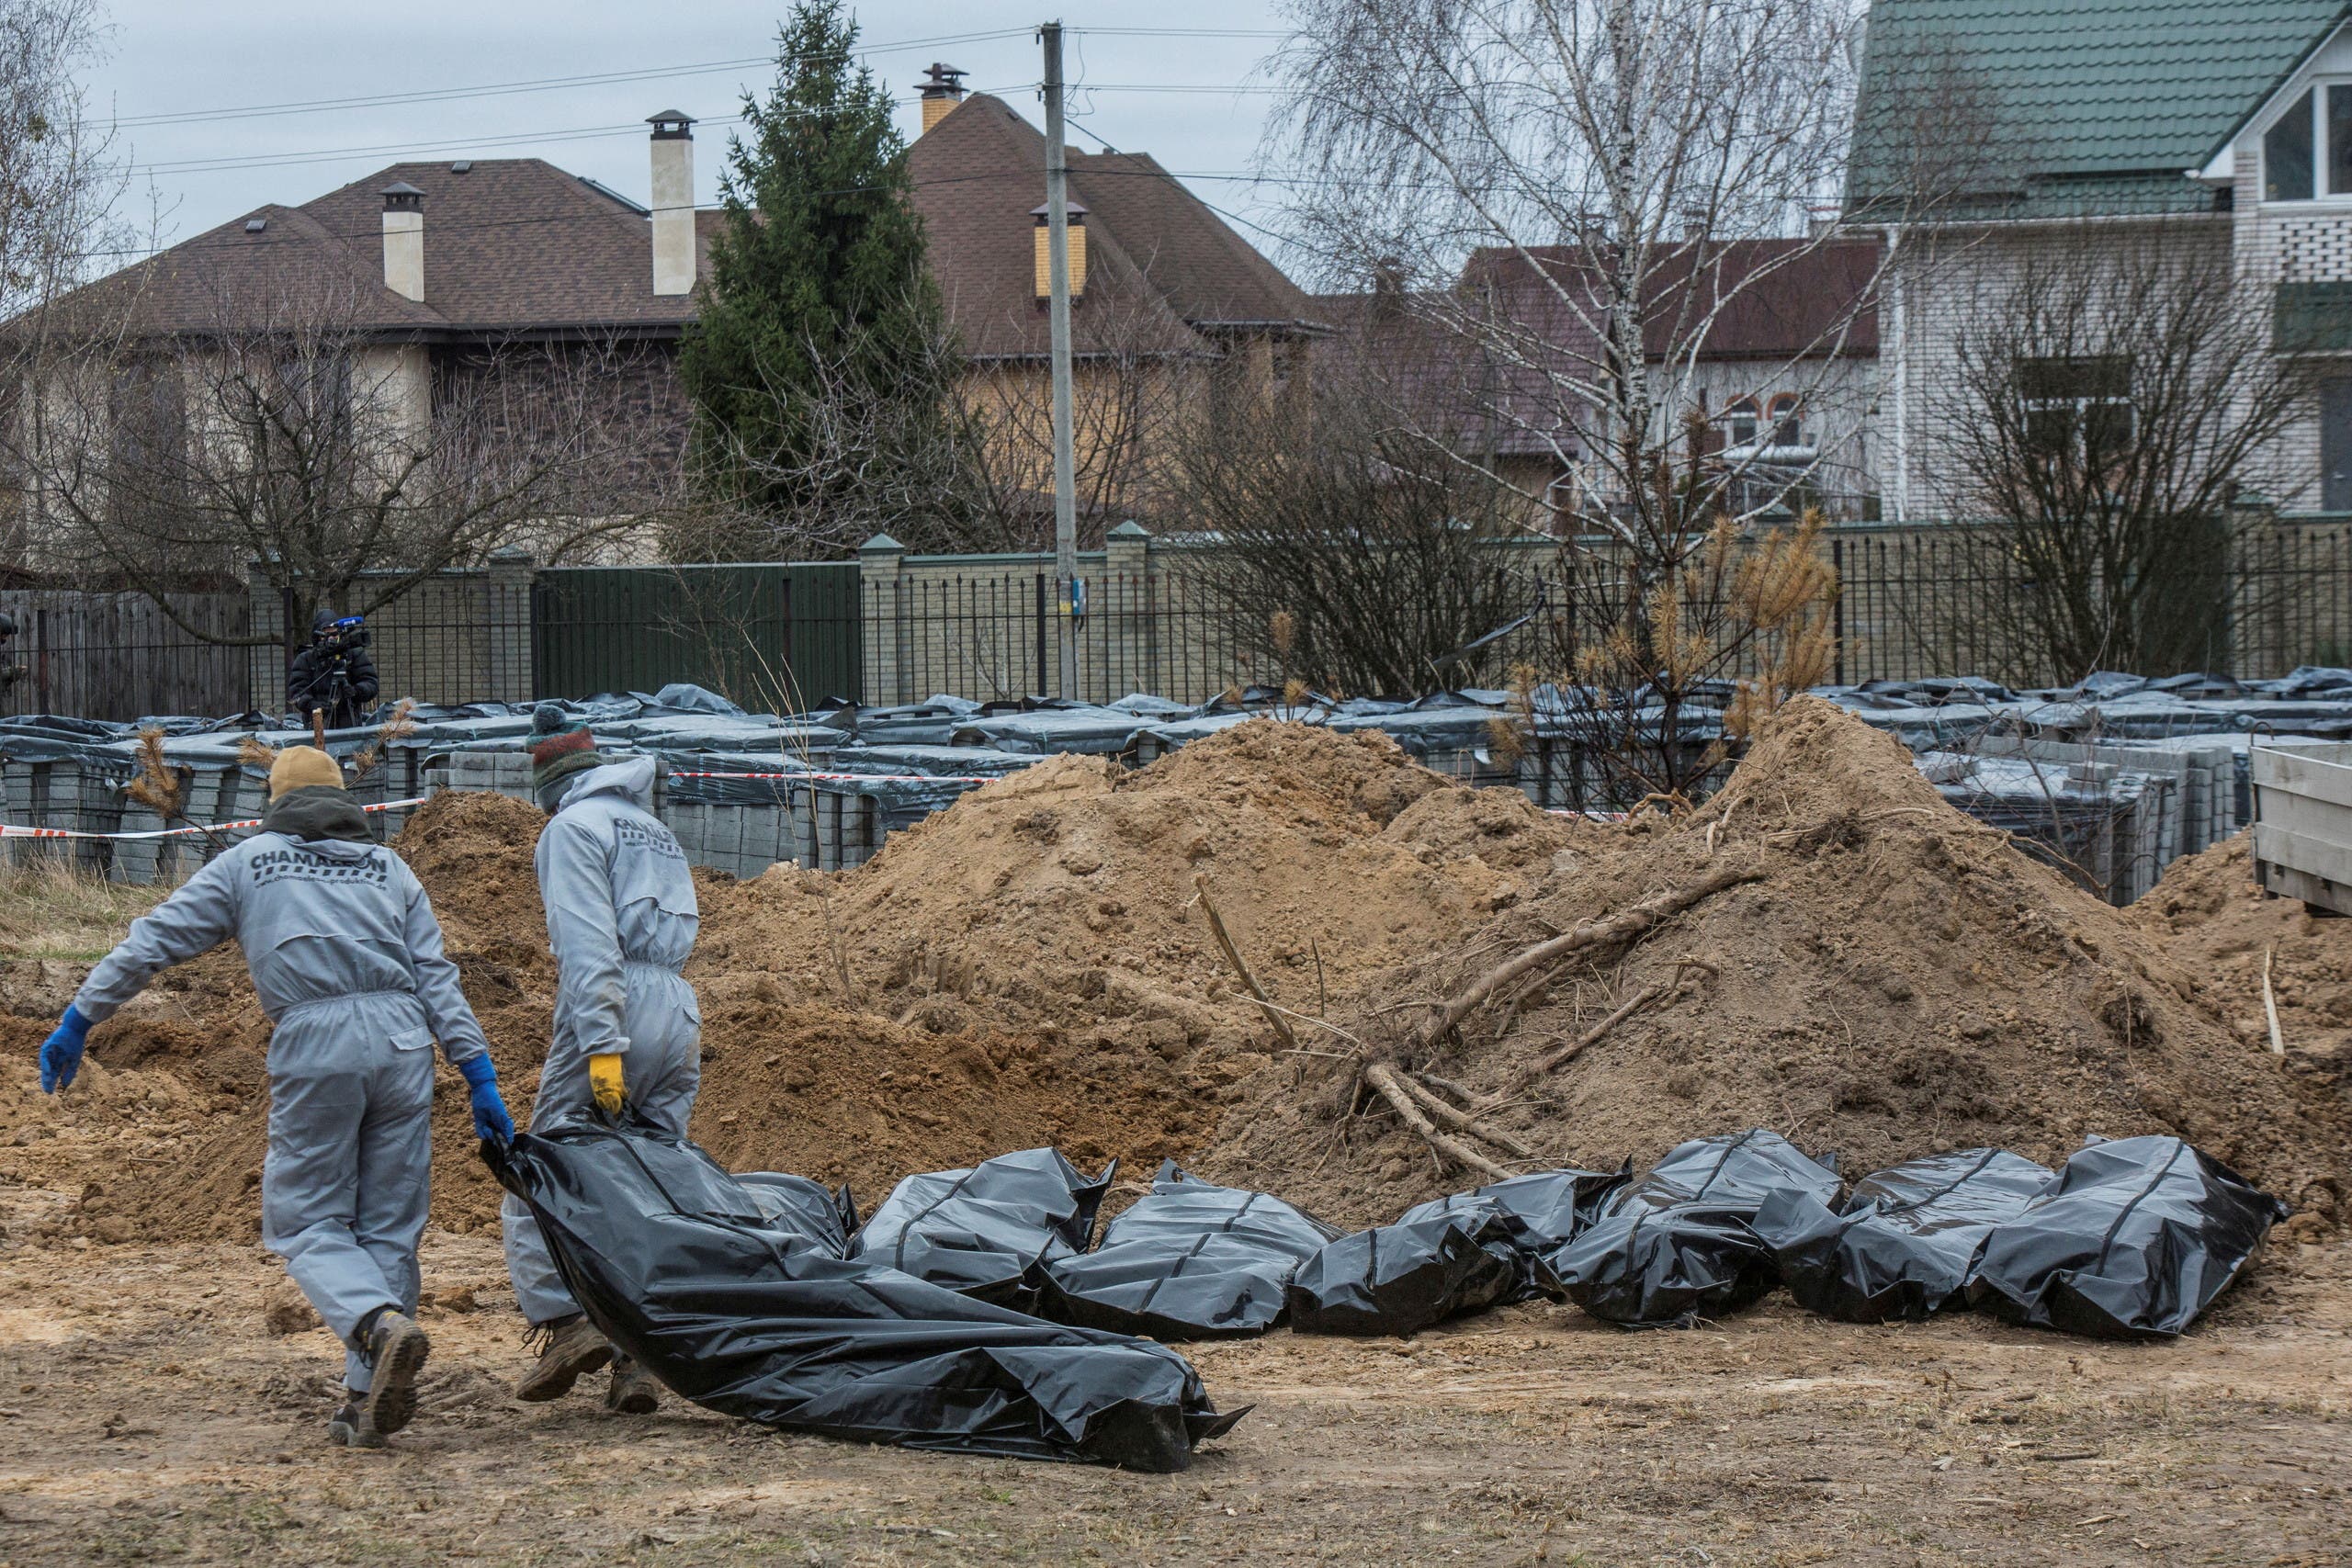 Forensic technicians carry pull the body of a civilian who Ukrainian officials say was killed during Russia’s invasion, then buried and exhumed from a mass grave in the town of Bucha, outside Kyiv, Ukraine April 13, 2022. (File Photo: Reuters)